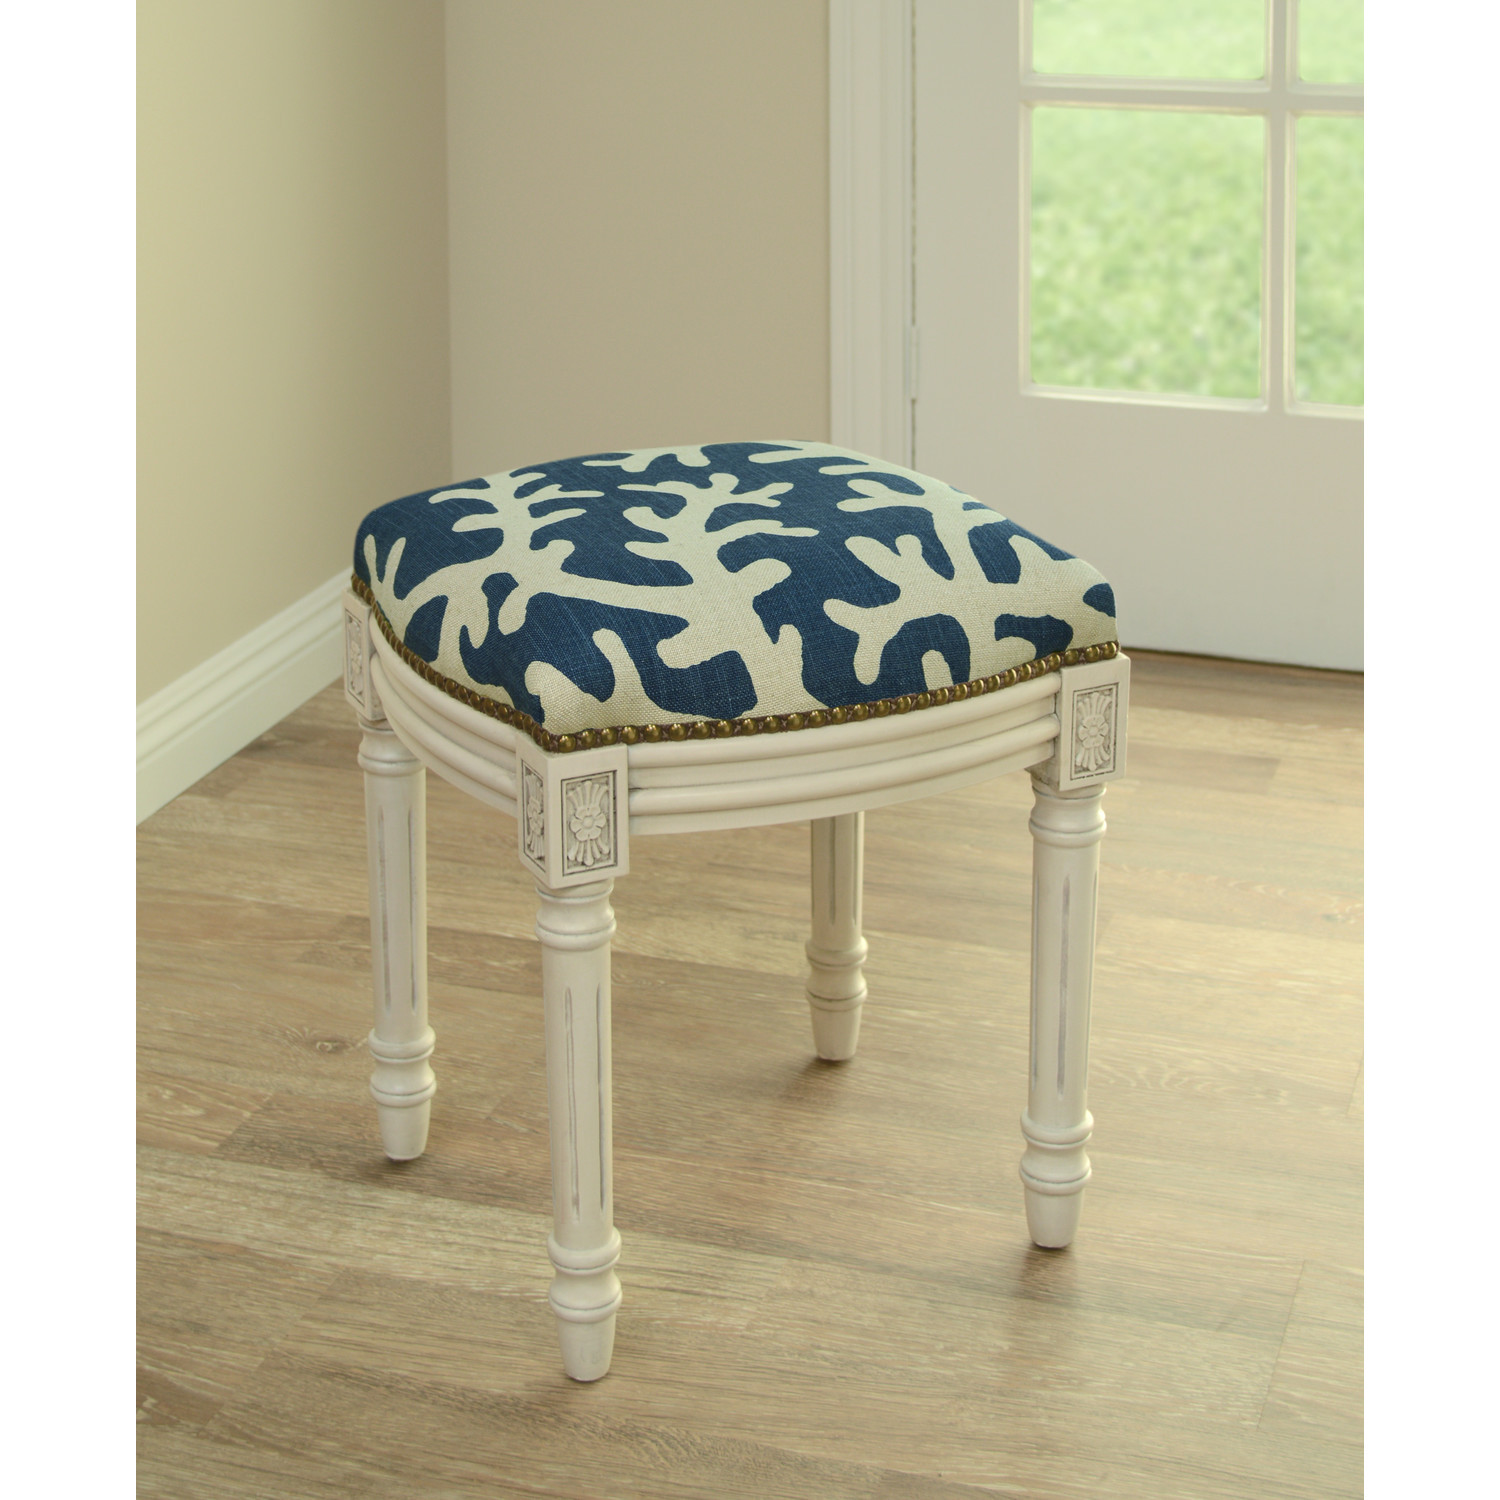 Small Bench For Bedroom
 Small Upholstered Bench An Instant Seating Addition Idea